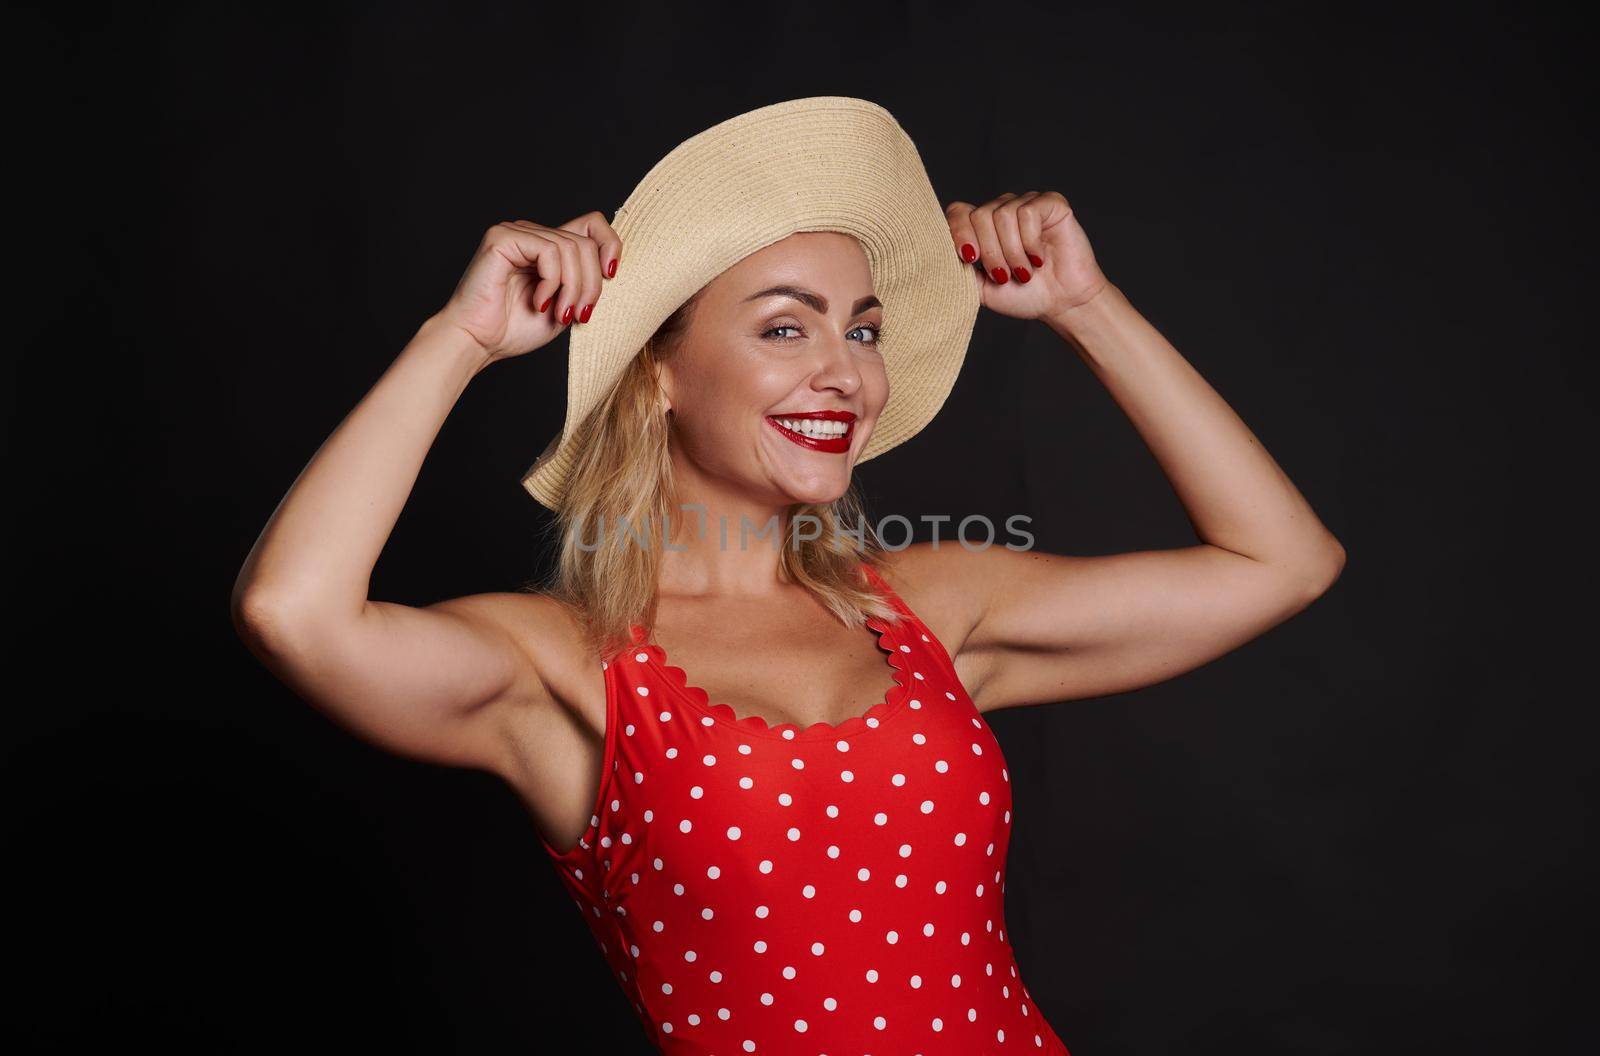 Attractive Caucasian blonde woman in a red swimsuit with white polka dots and a straw summer hat smiles a beautiful toothy smile, looking at the camera posing against black wall background. Copy space